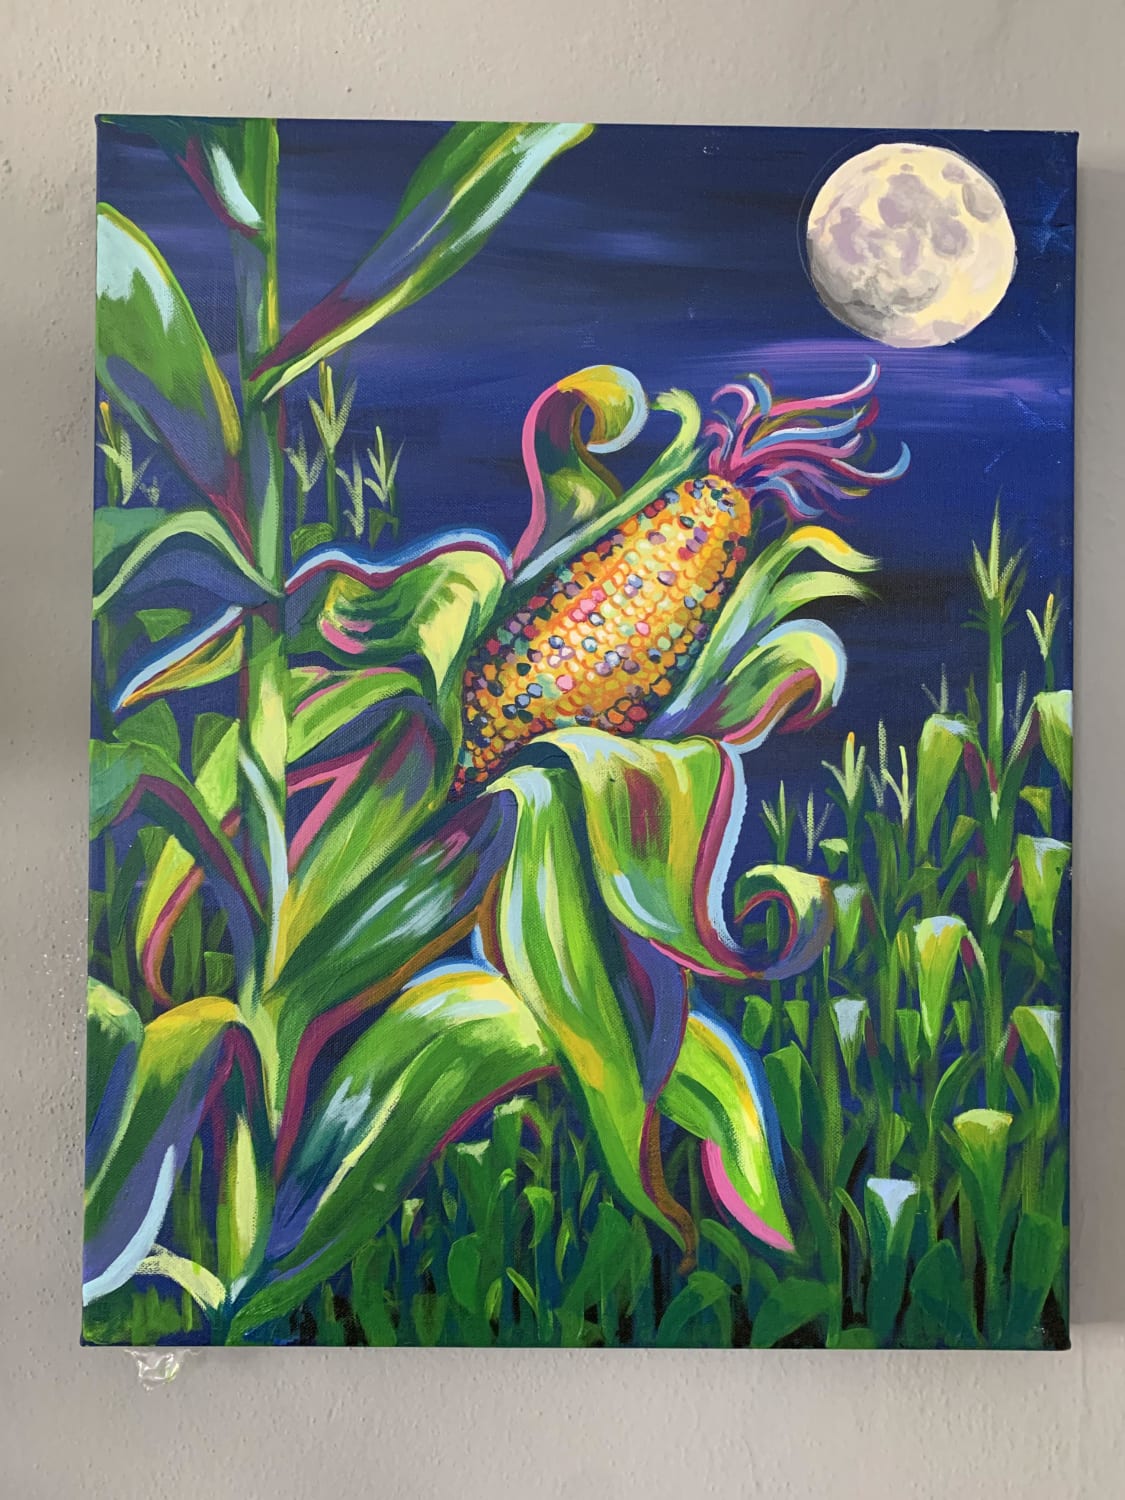 I was commissioned to paint psychedelic corn in the moonlight. A bit out of my comfort zone so suggestions welcome.